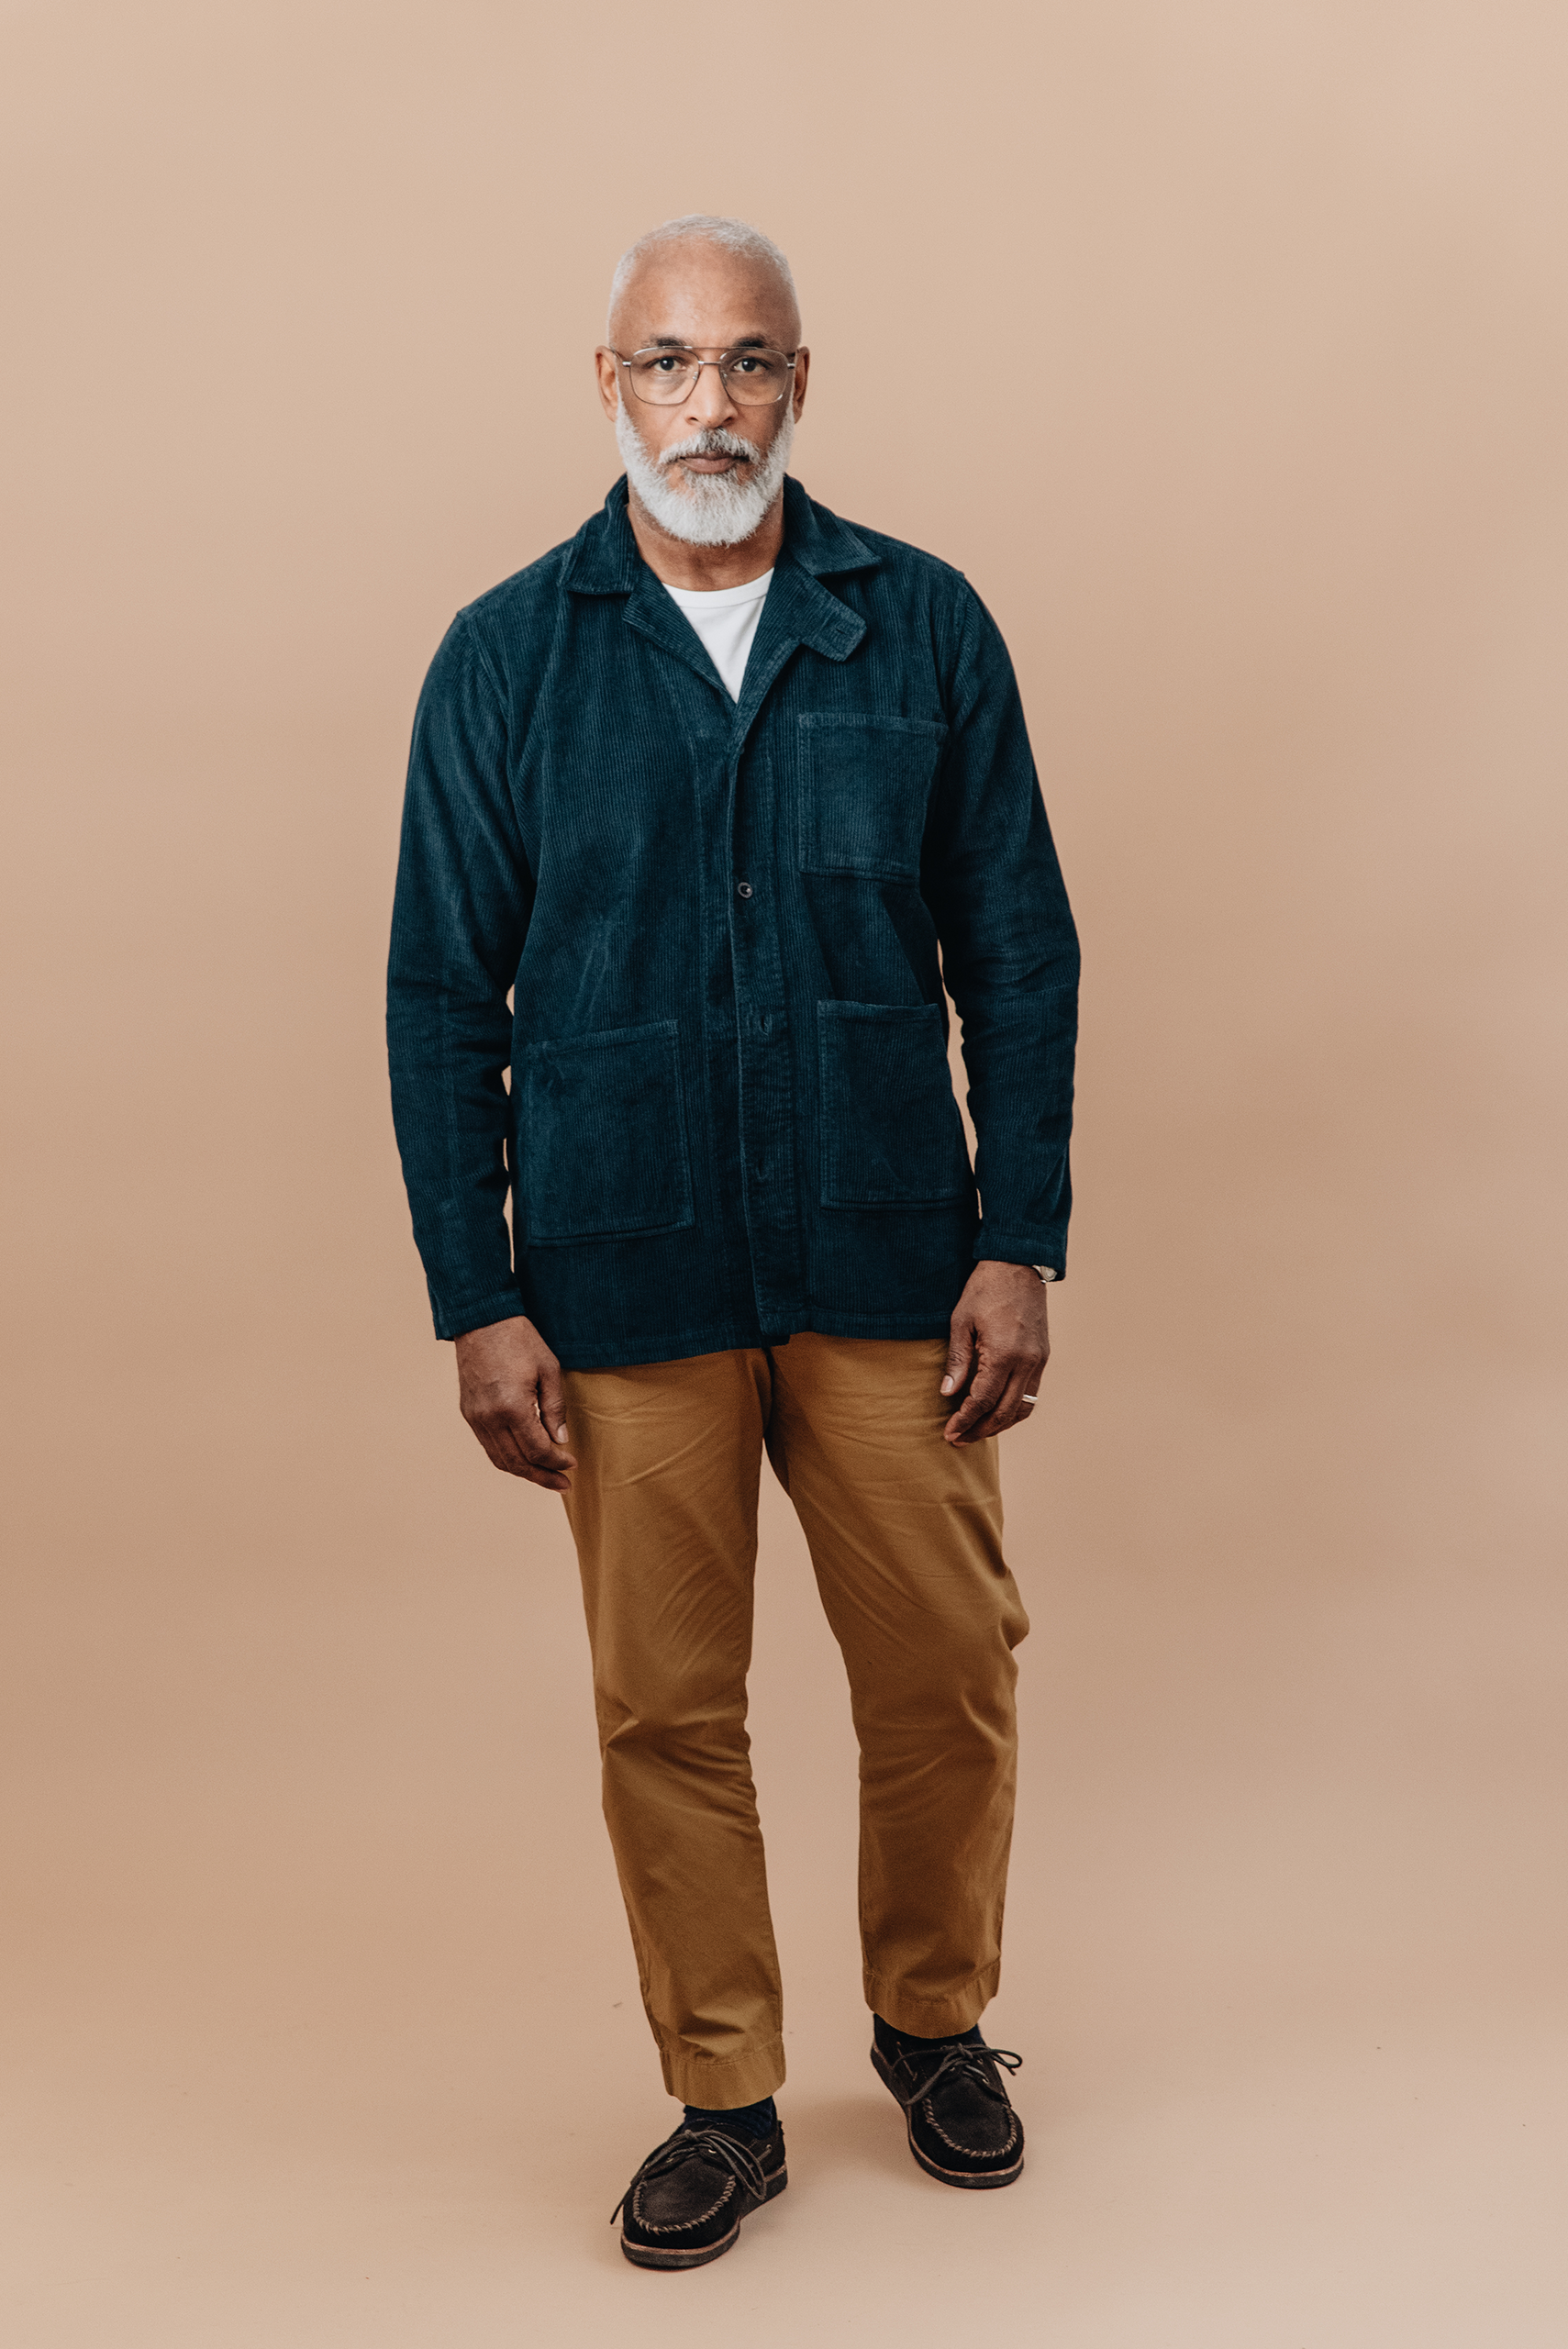 Corduroy Jacket Timeless. Ethical. Sustainable FT – FormThread